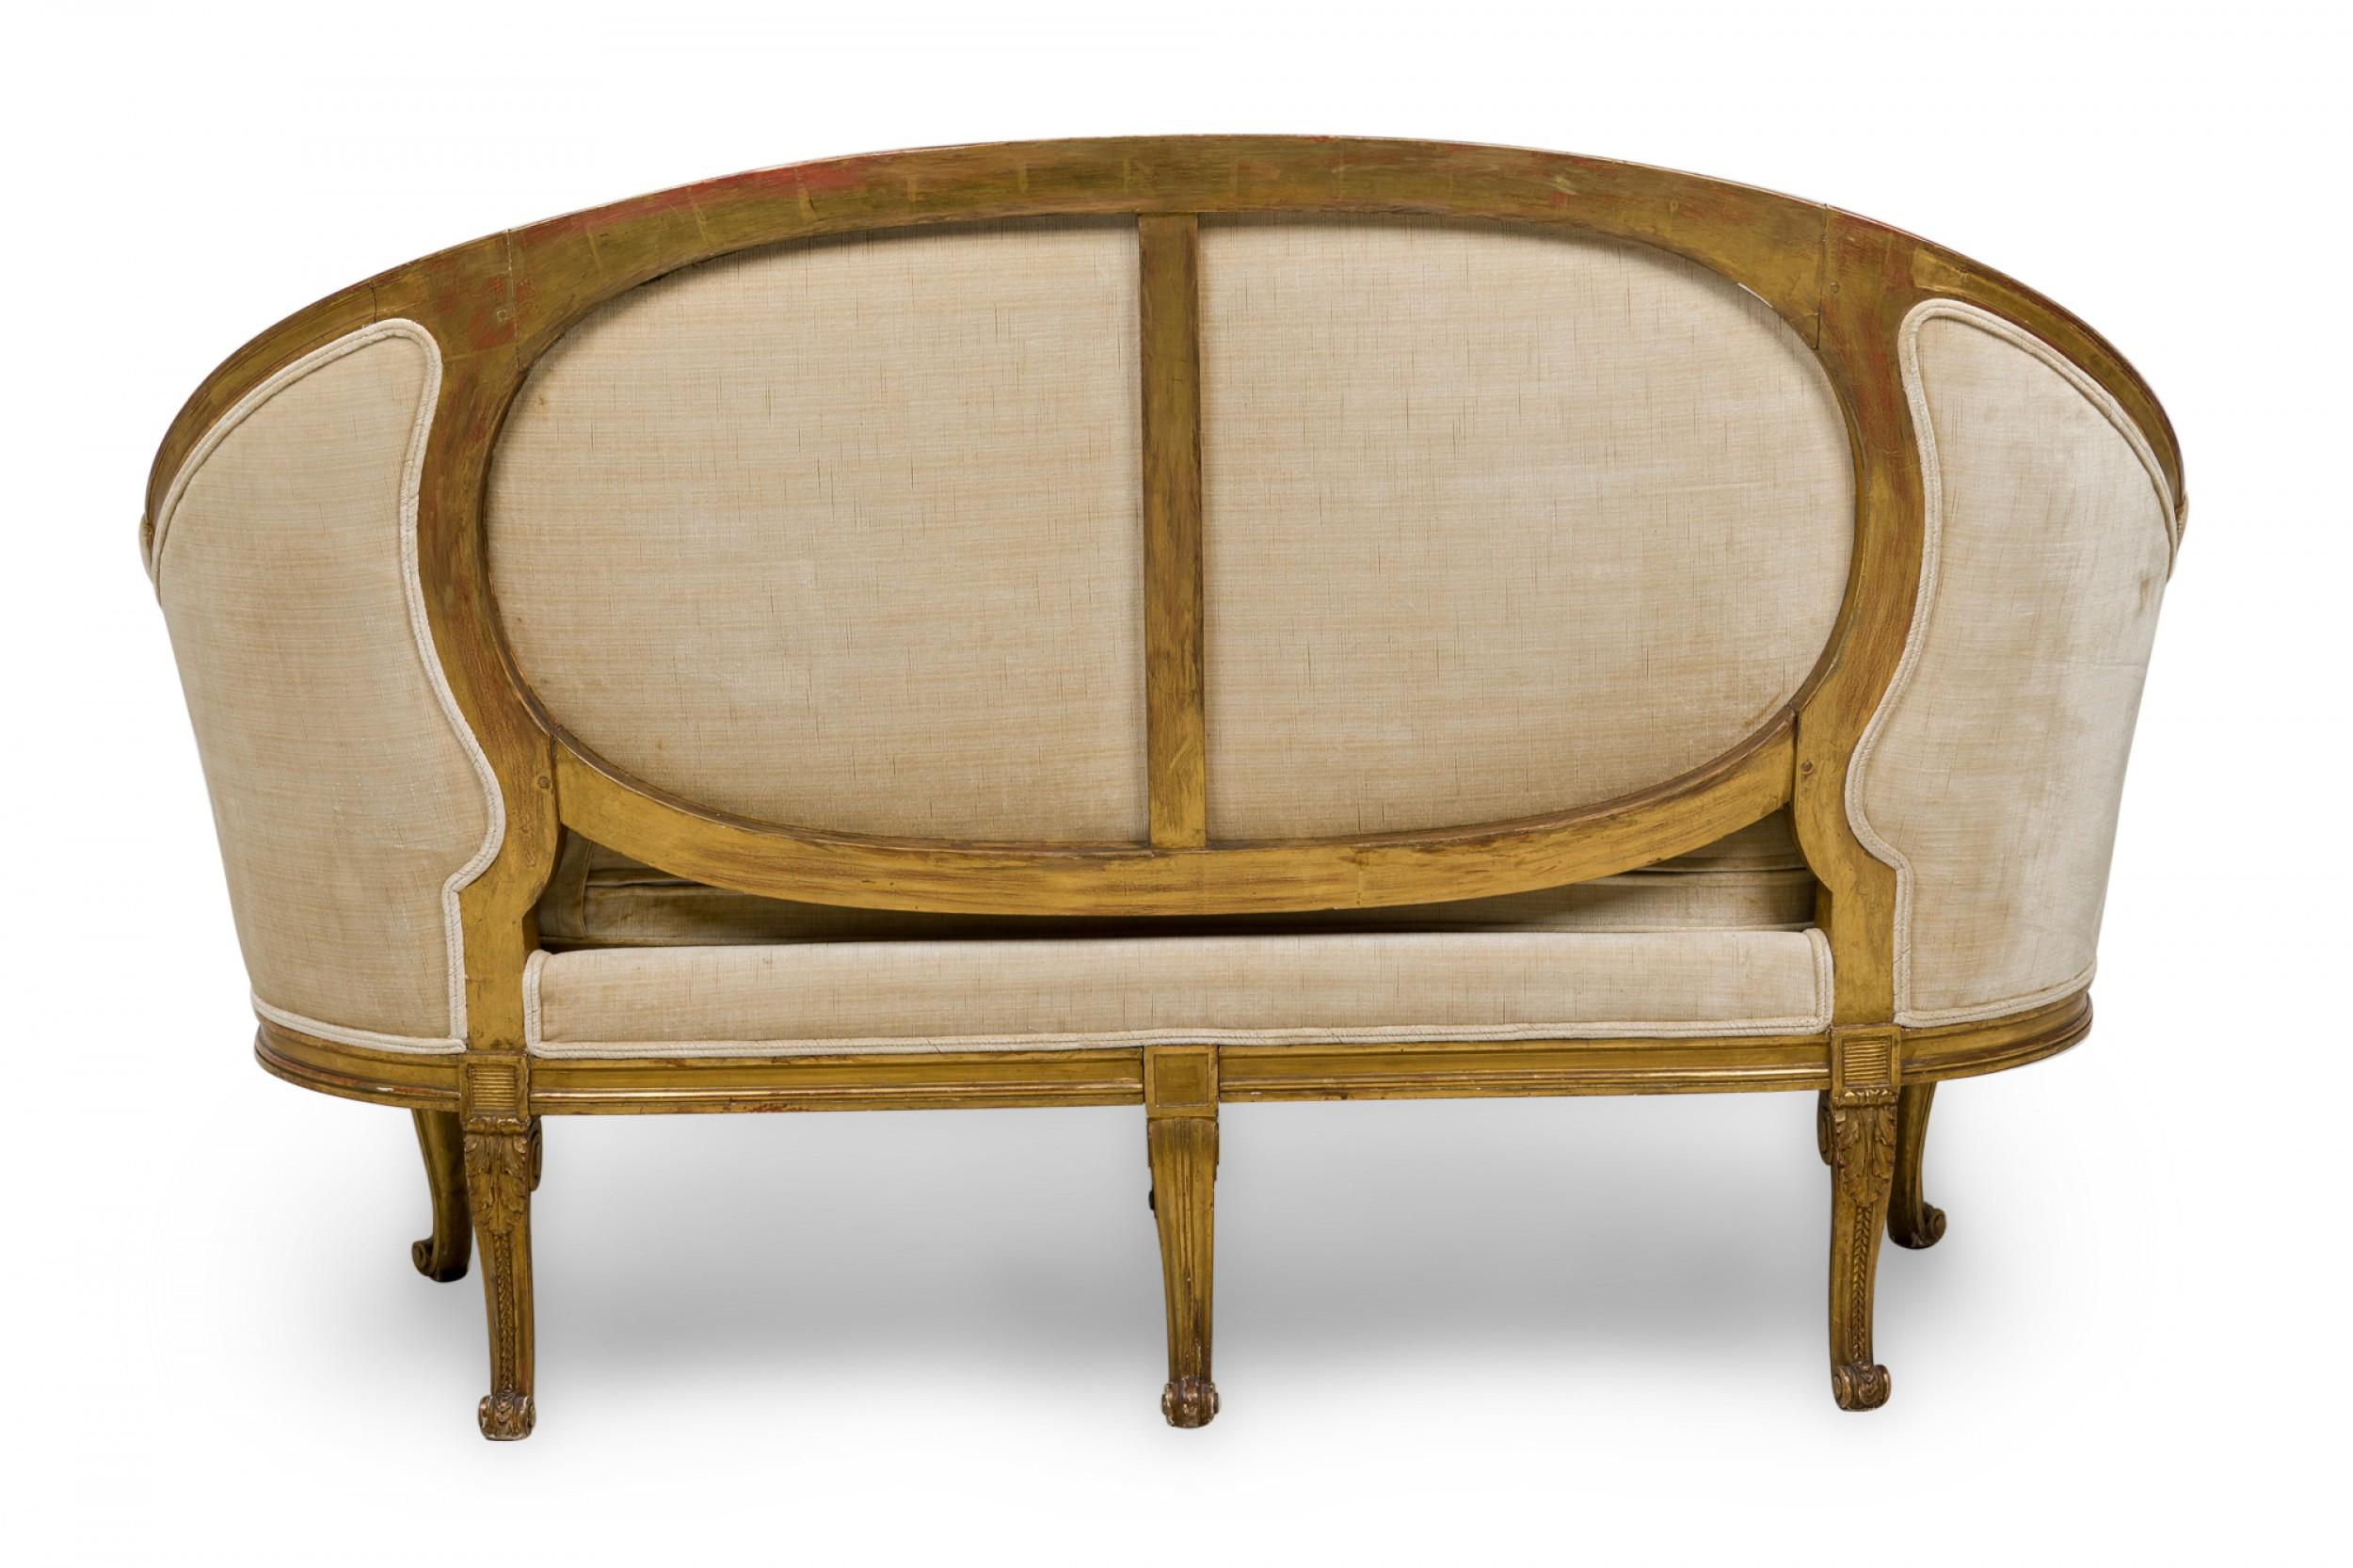 Pair of French Louis XVI Giltwood Beige Upholstered Canapes / Settees For Sale 3